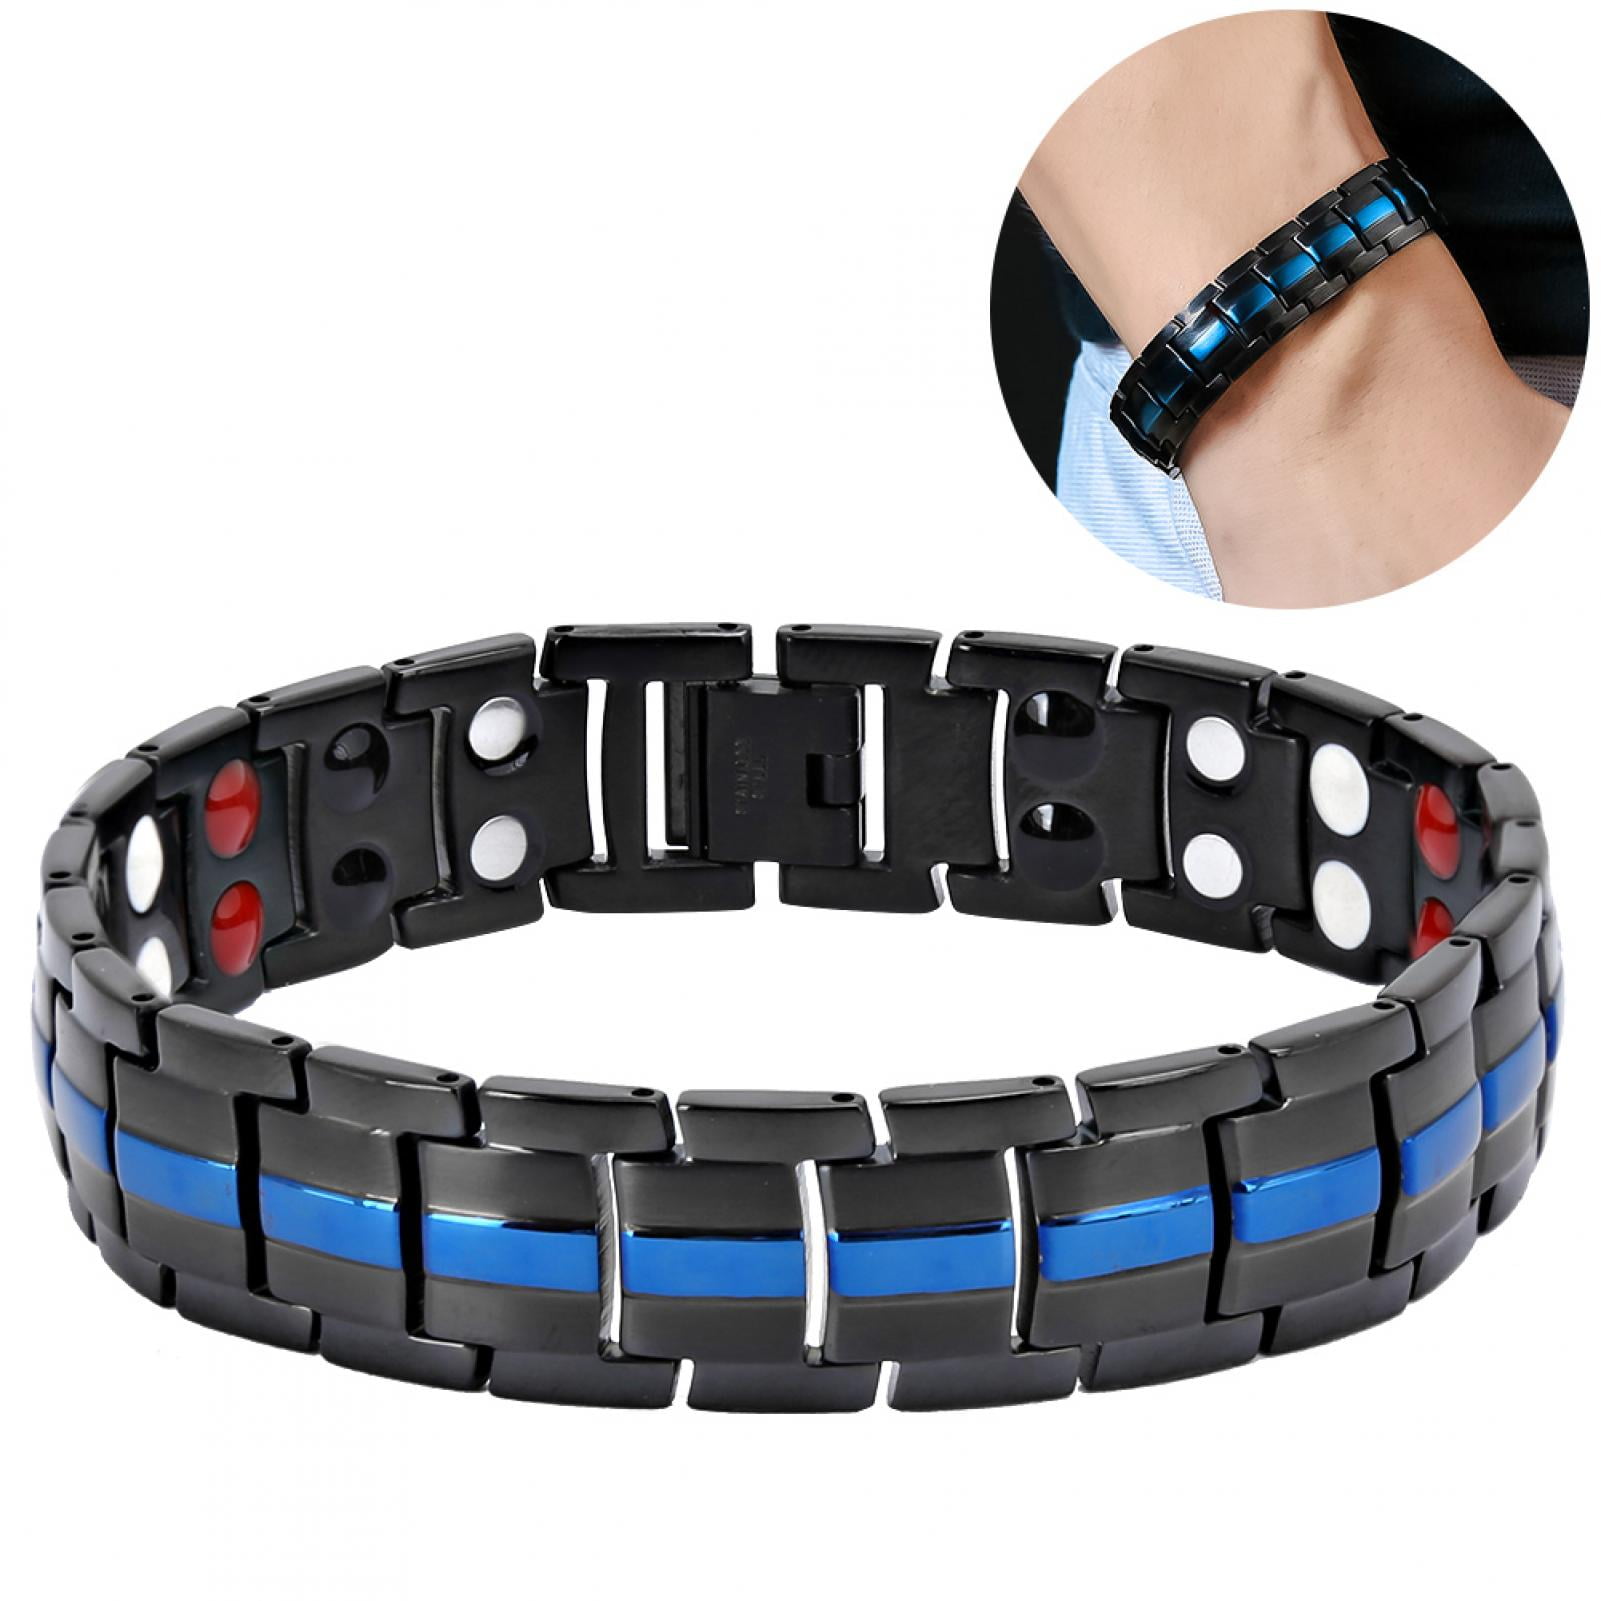 Rainso Mens Copper Double Row Magnetic Therapy Bracelets for Arthritis  Wristband Adjustable Double Row Magnetic Style 2 Copper price in UAE   Amazon UAE  kanbkam